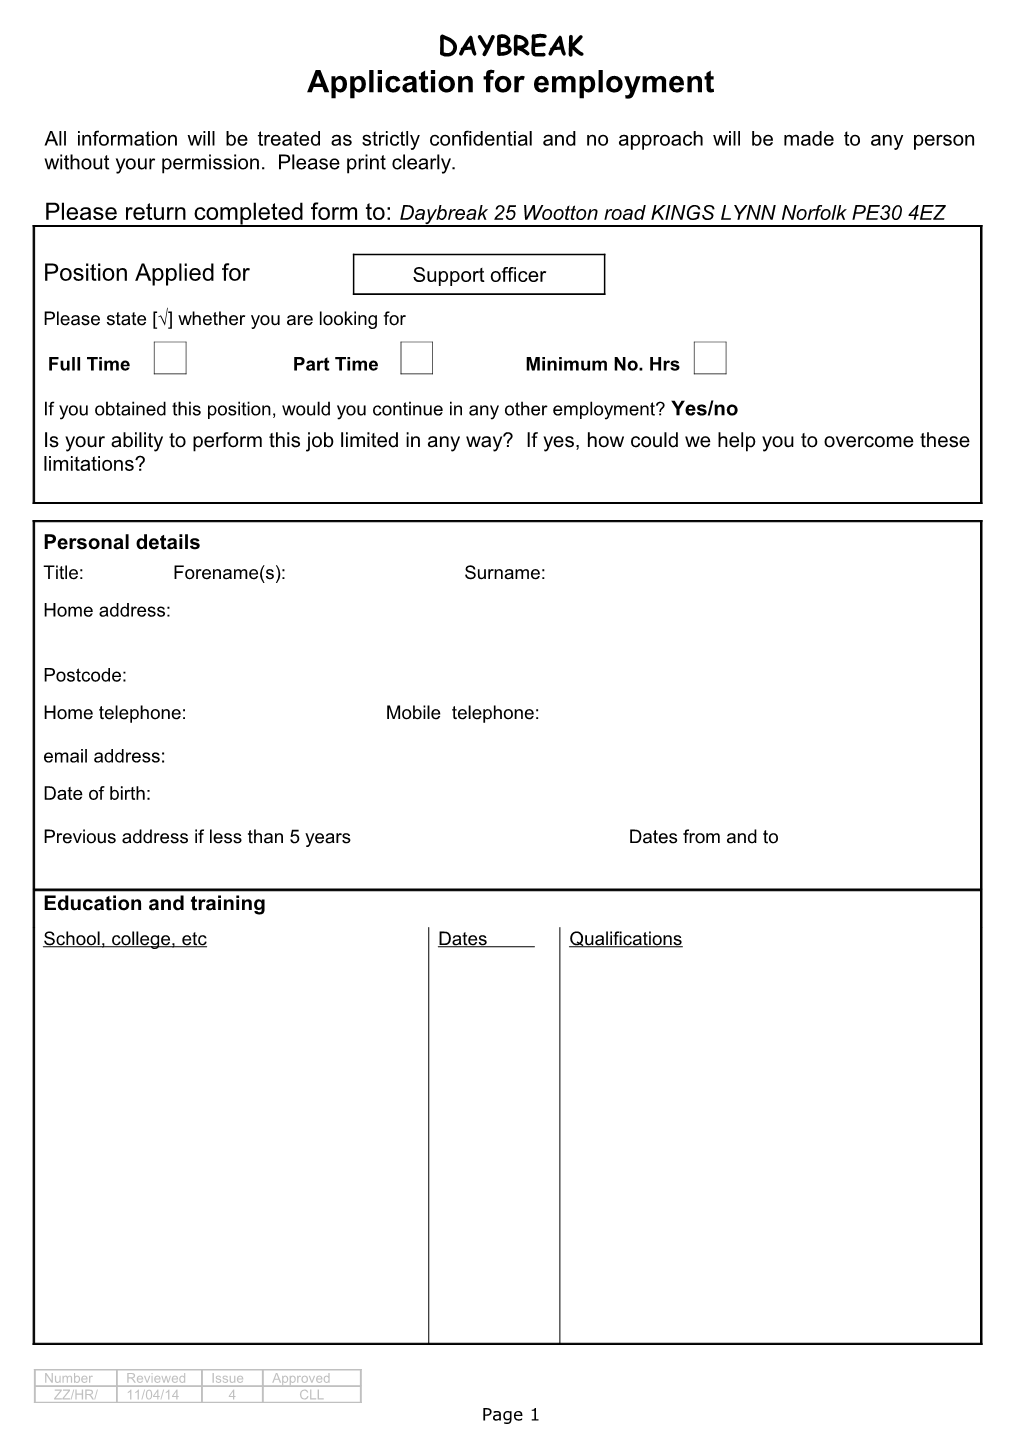 Application for Employment s165